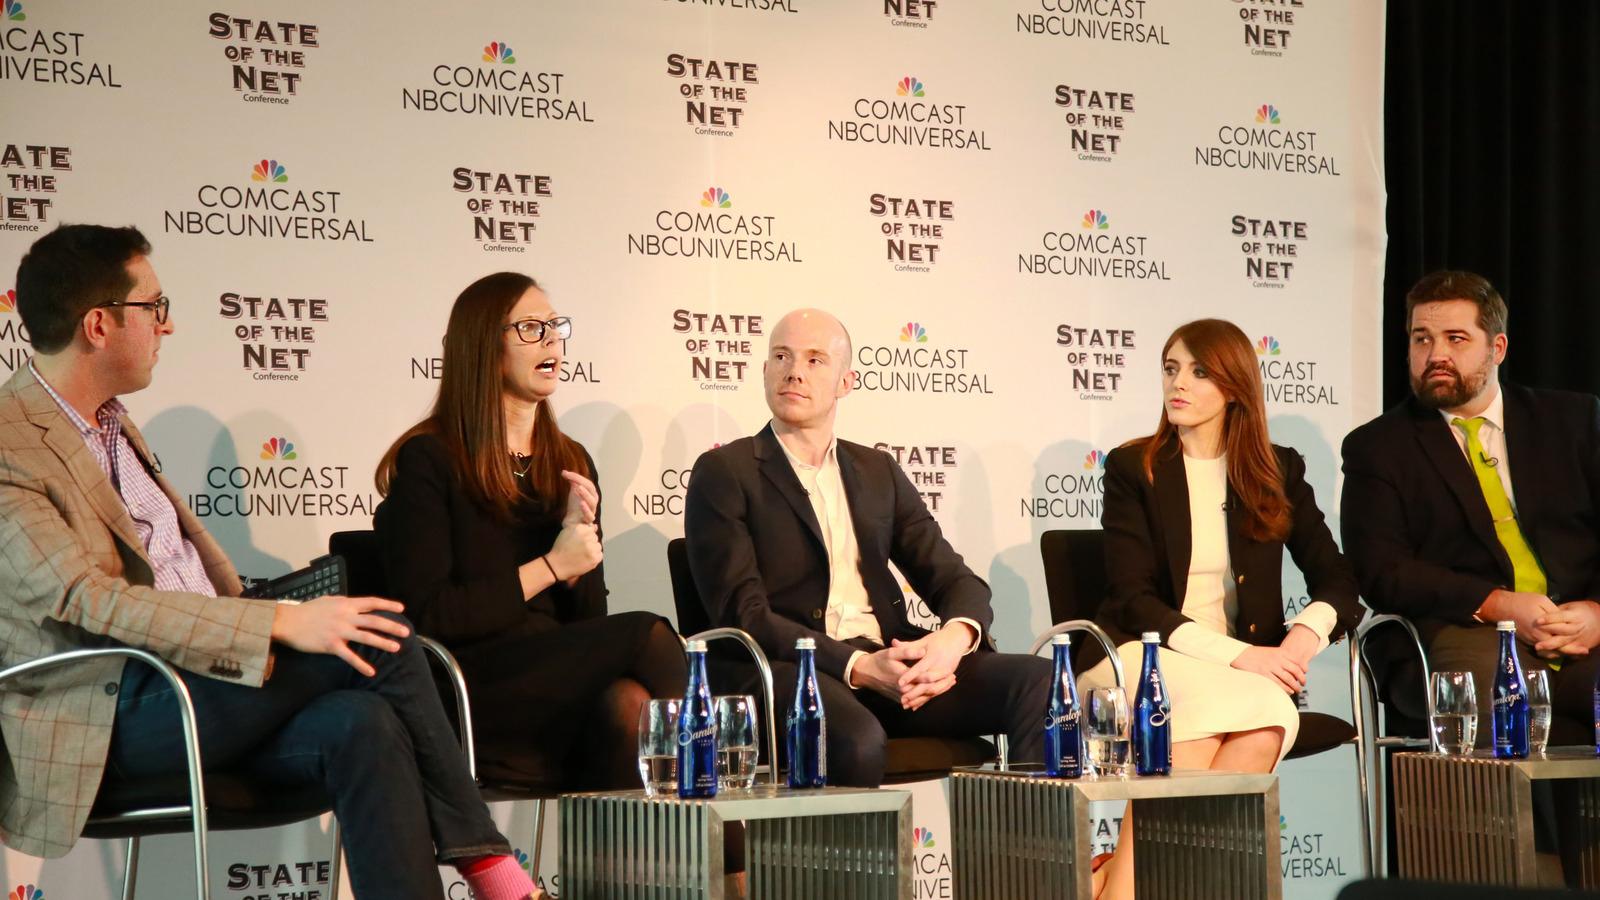 A group of panelists address an audience at the State of the Net Conference in January. The panel consists of (from left to right) Jason Kaplan, Hilary Swab Gawrilow, James Cross, Mercina Tillmann-Dick and Justin Herman. 